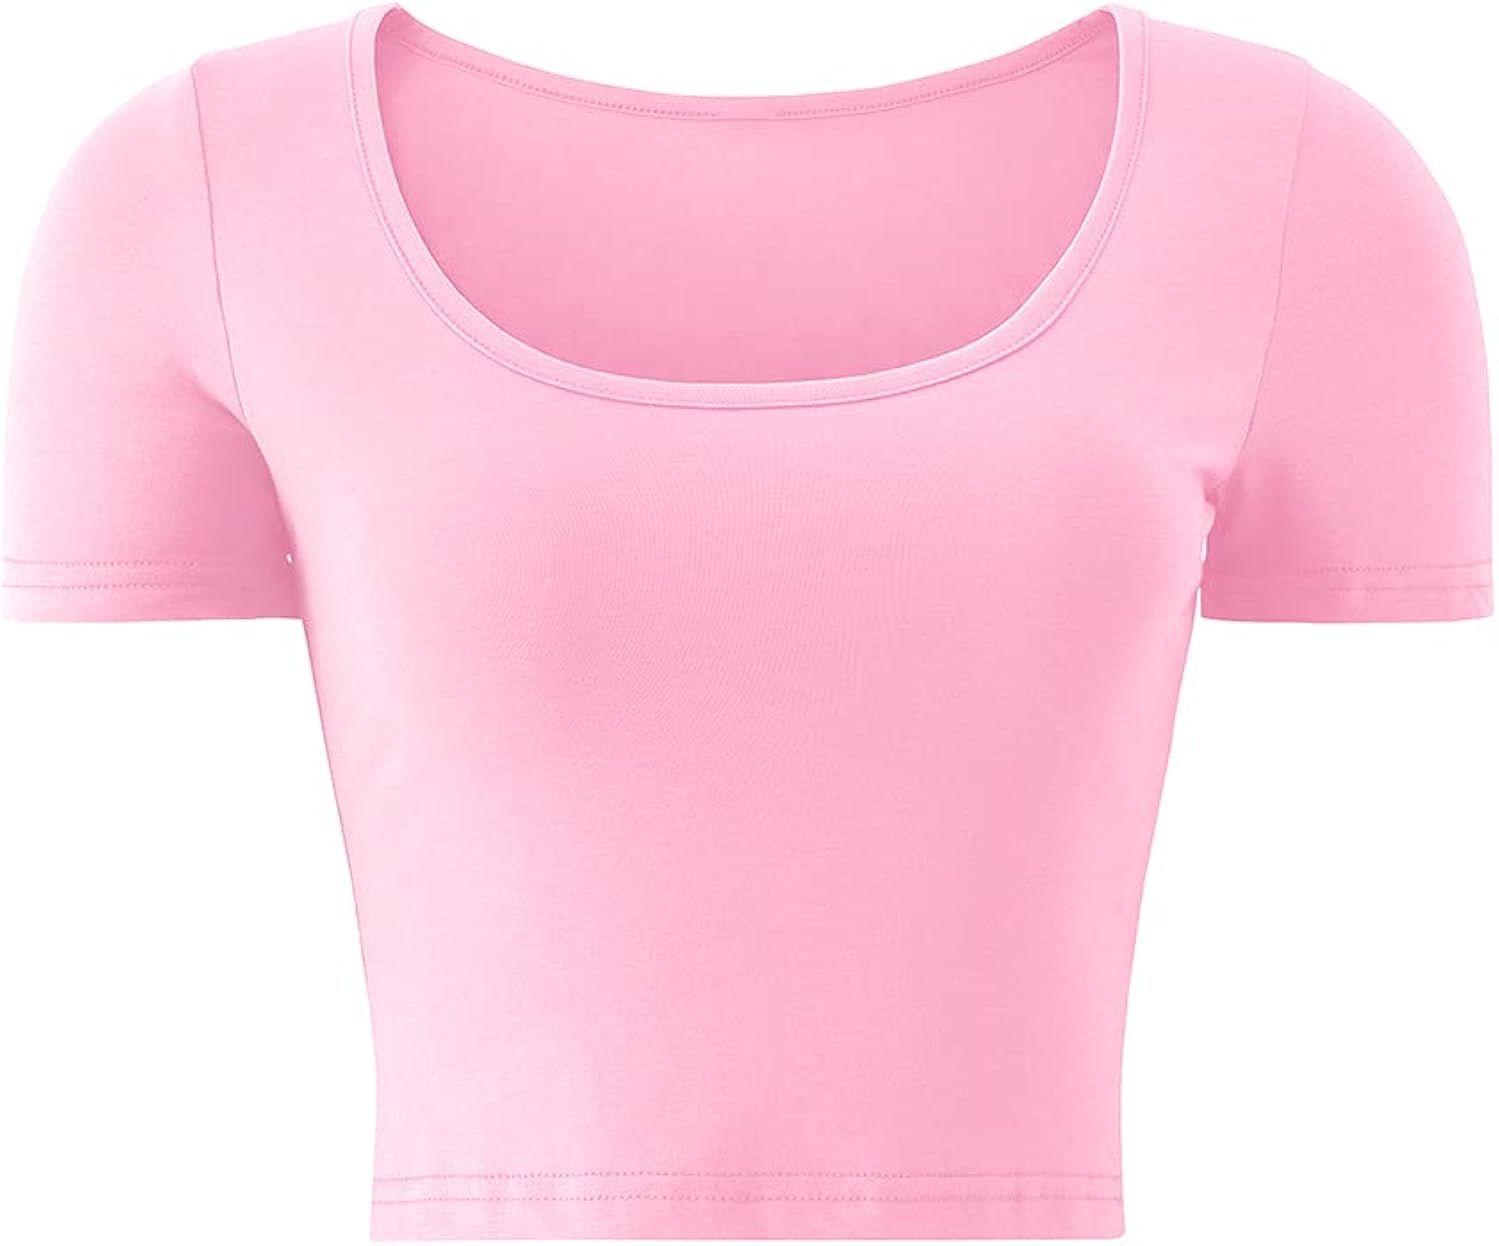 KLOTHO Lightweight Crop Tops Slim Fit Stretchy Workout Shirts for Women or Teen Girls | Amazon (US)